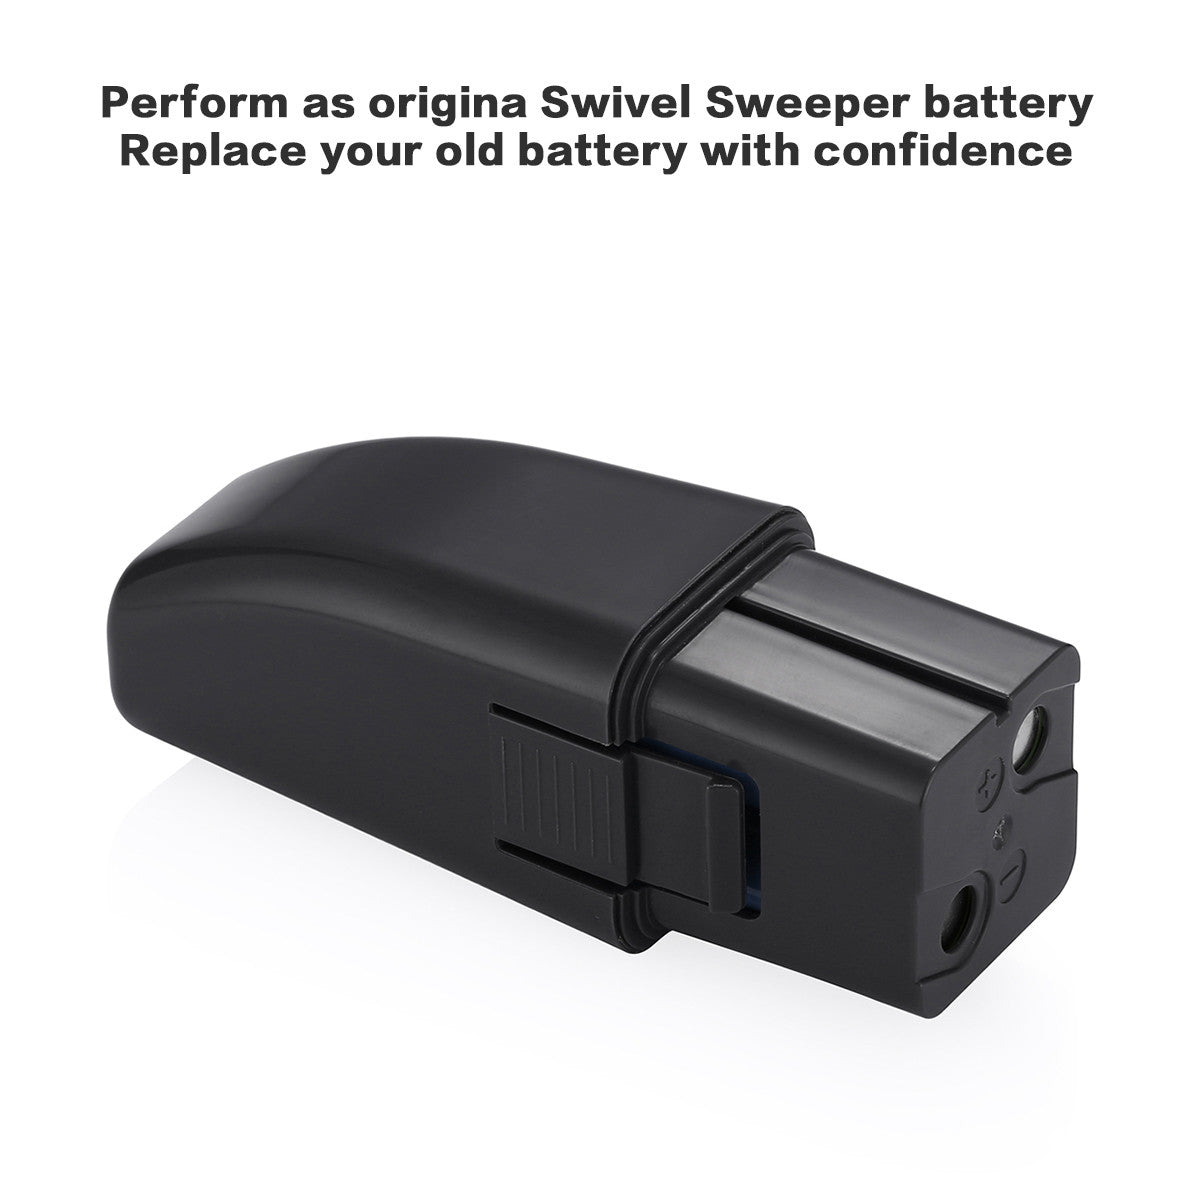 Powerextra 7.2V 2000mAh Replacement Battery for Ontel Swivel Sweeper G1 G2